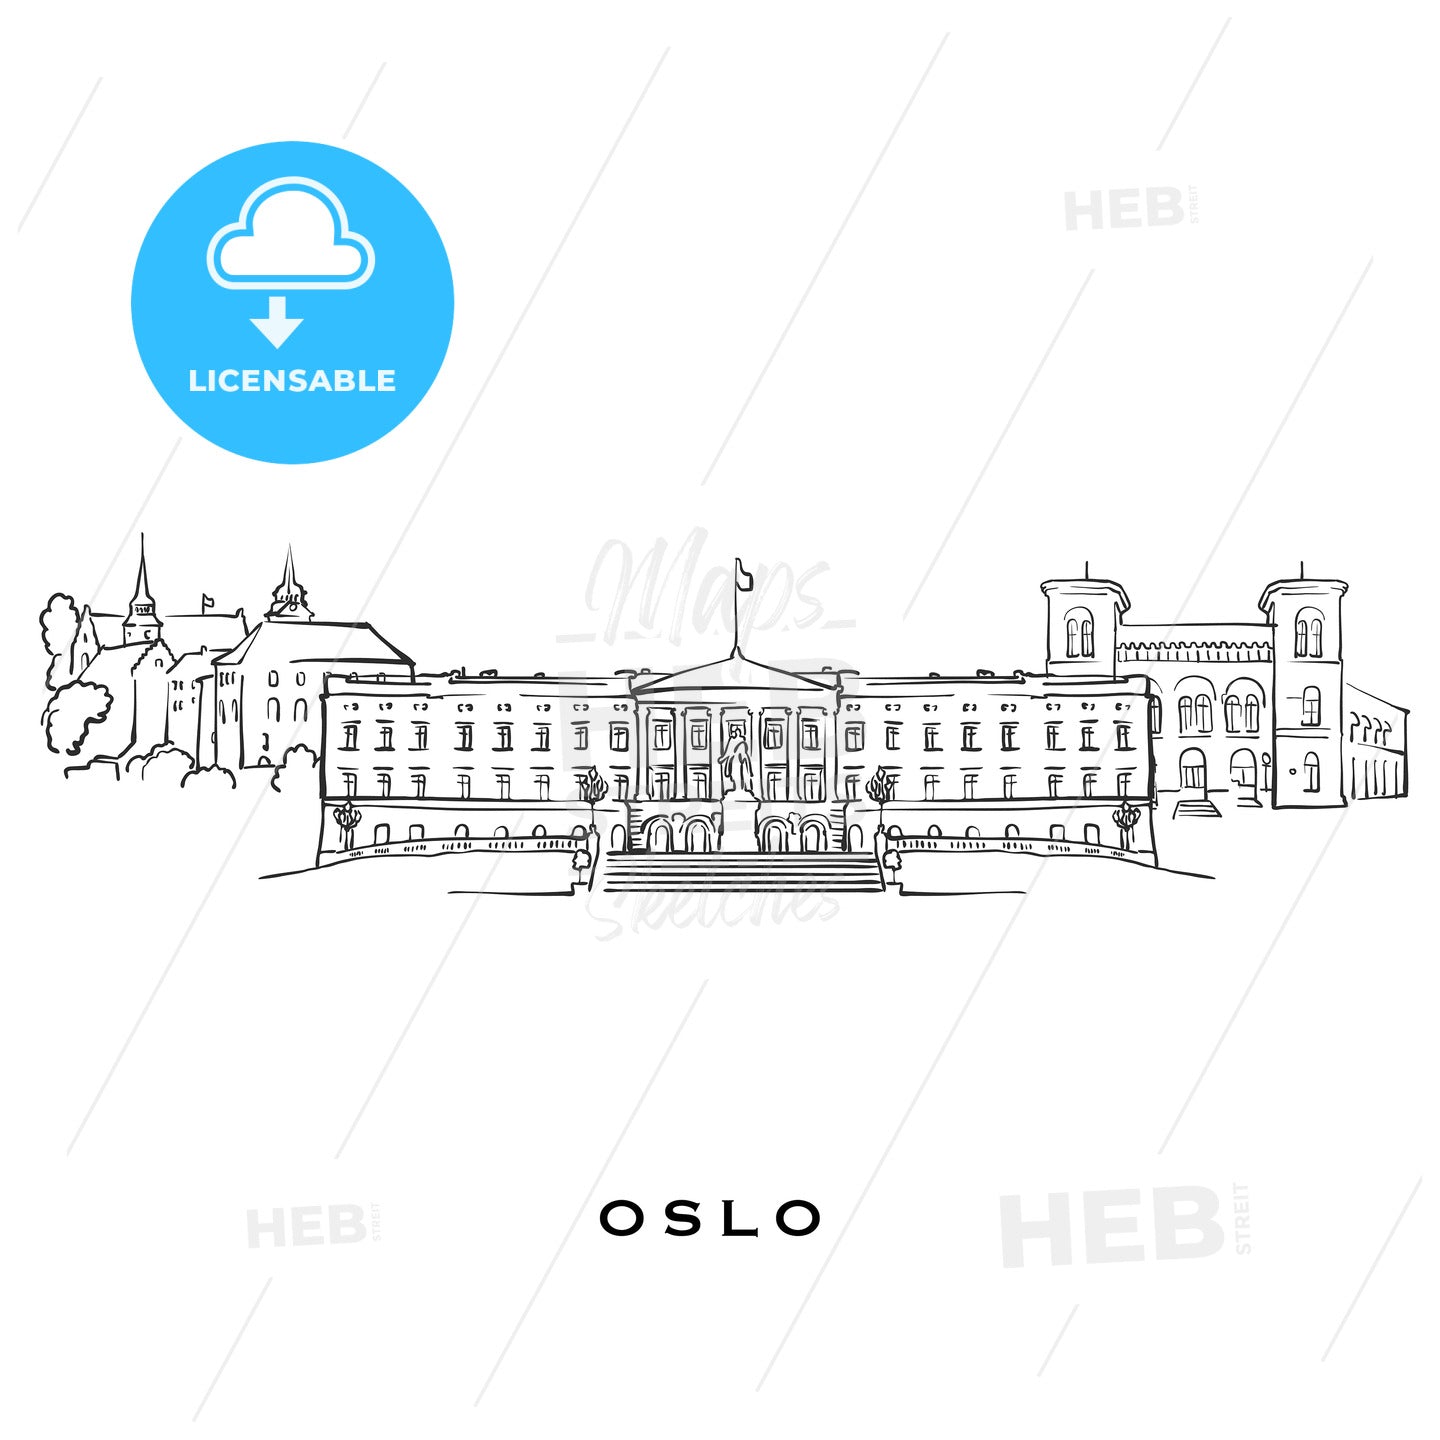 Oslo Norway famous architecture – instant download